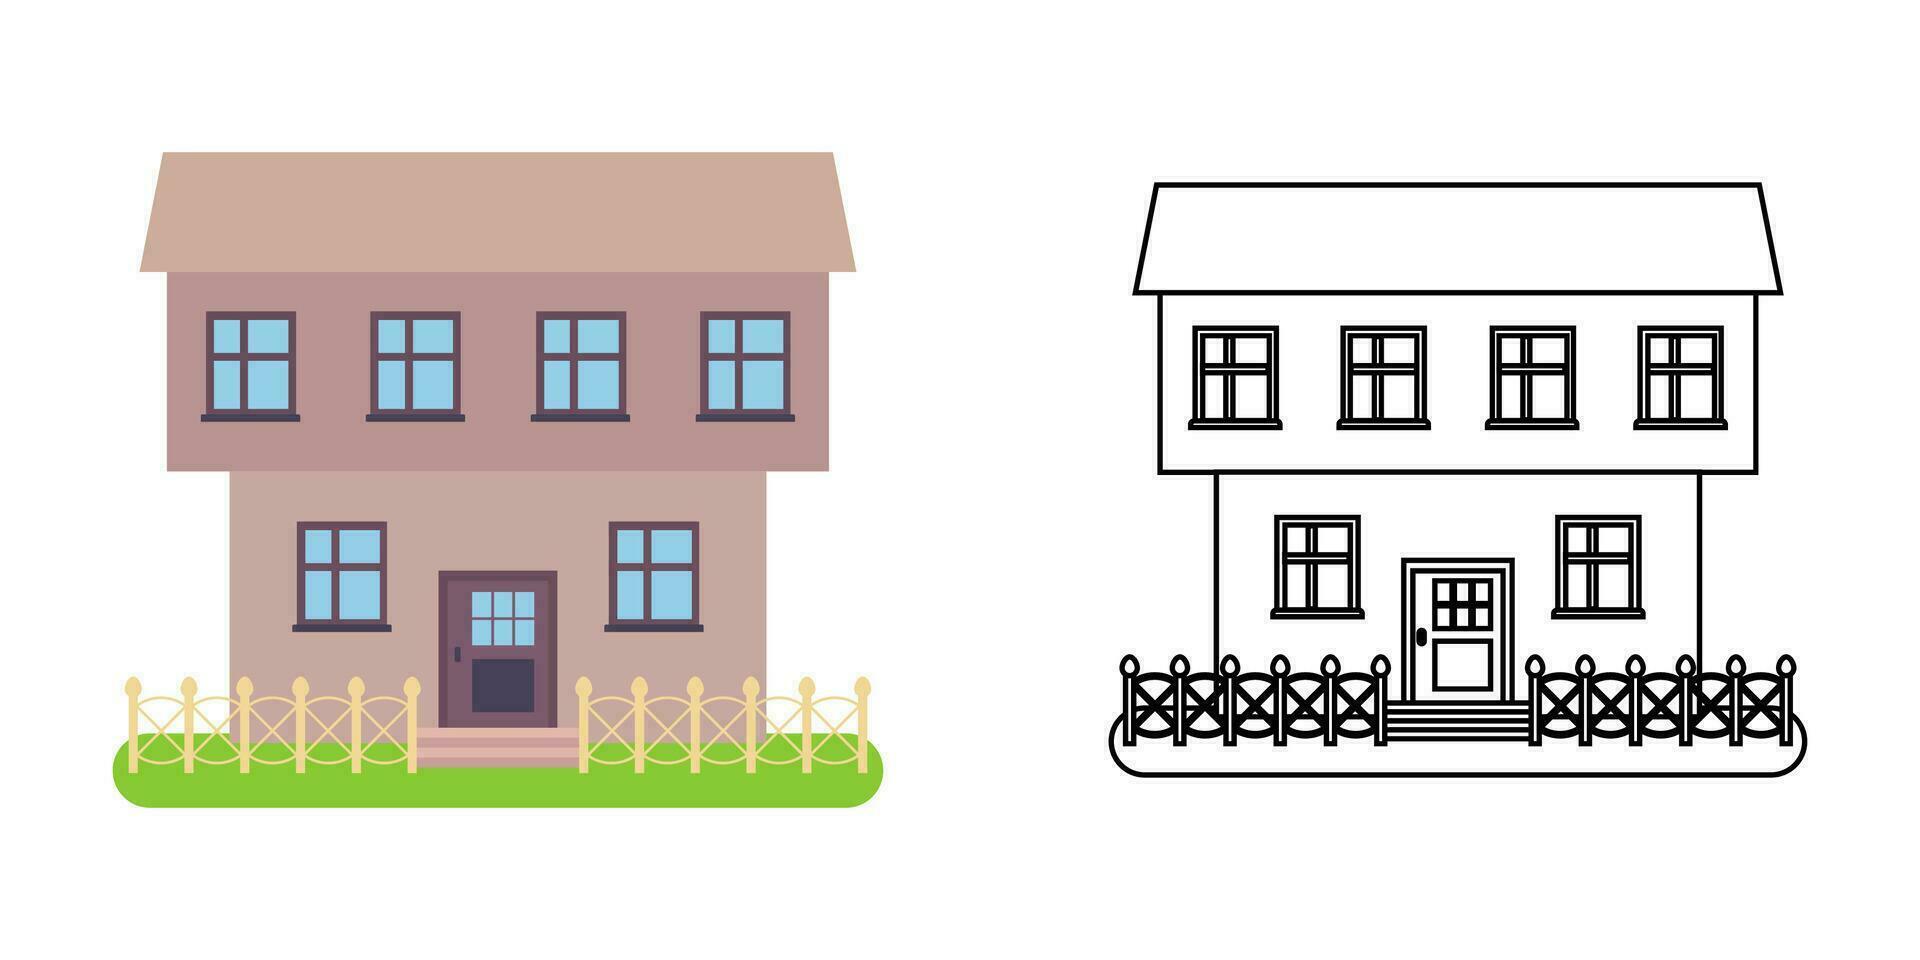 House front view in flat and line style vector